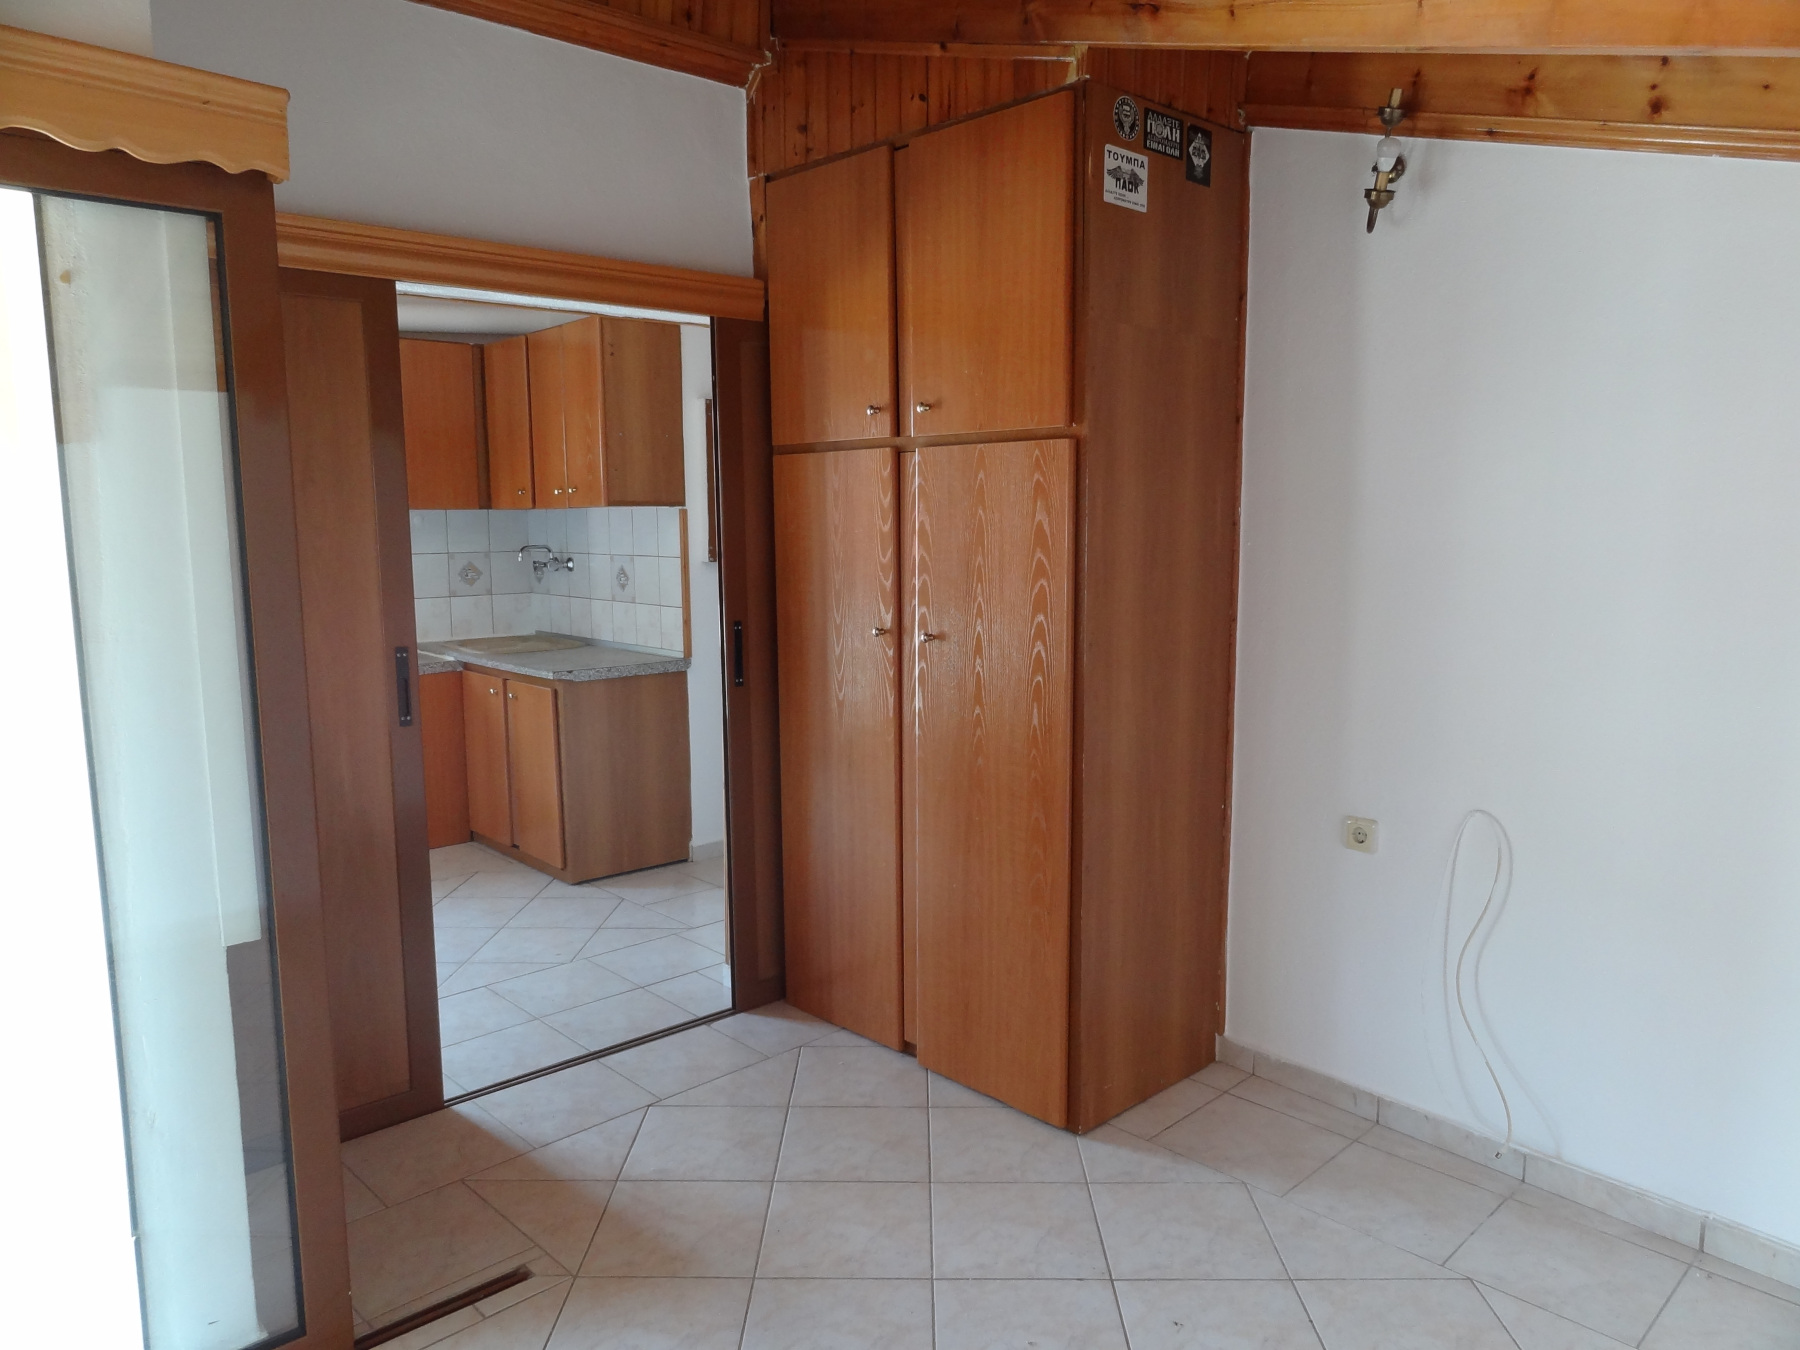 For rent 1 bedroom apartment of 41 sq.m. 3rd floor near Homer Square in the area of Zeugaria, Ioannina